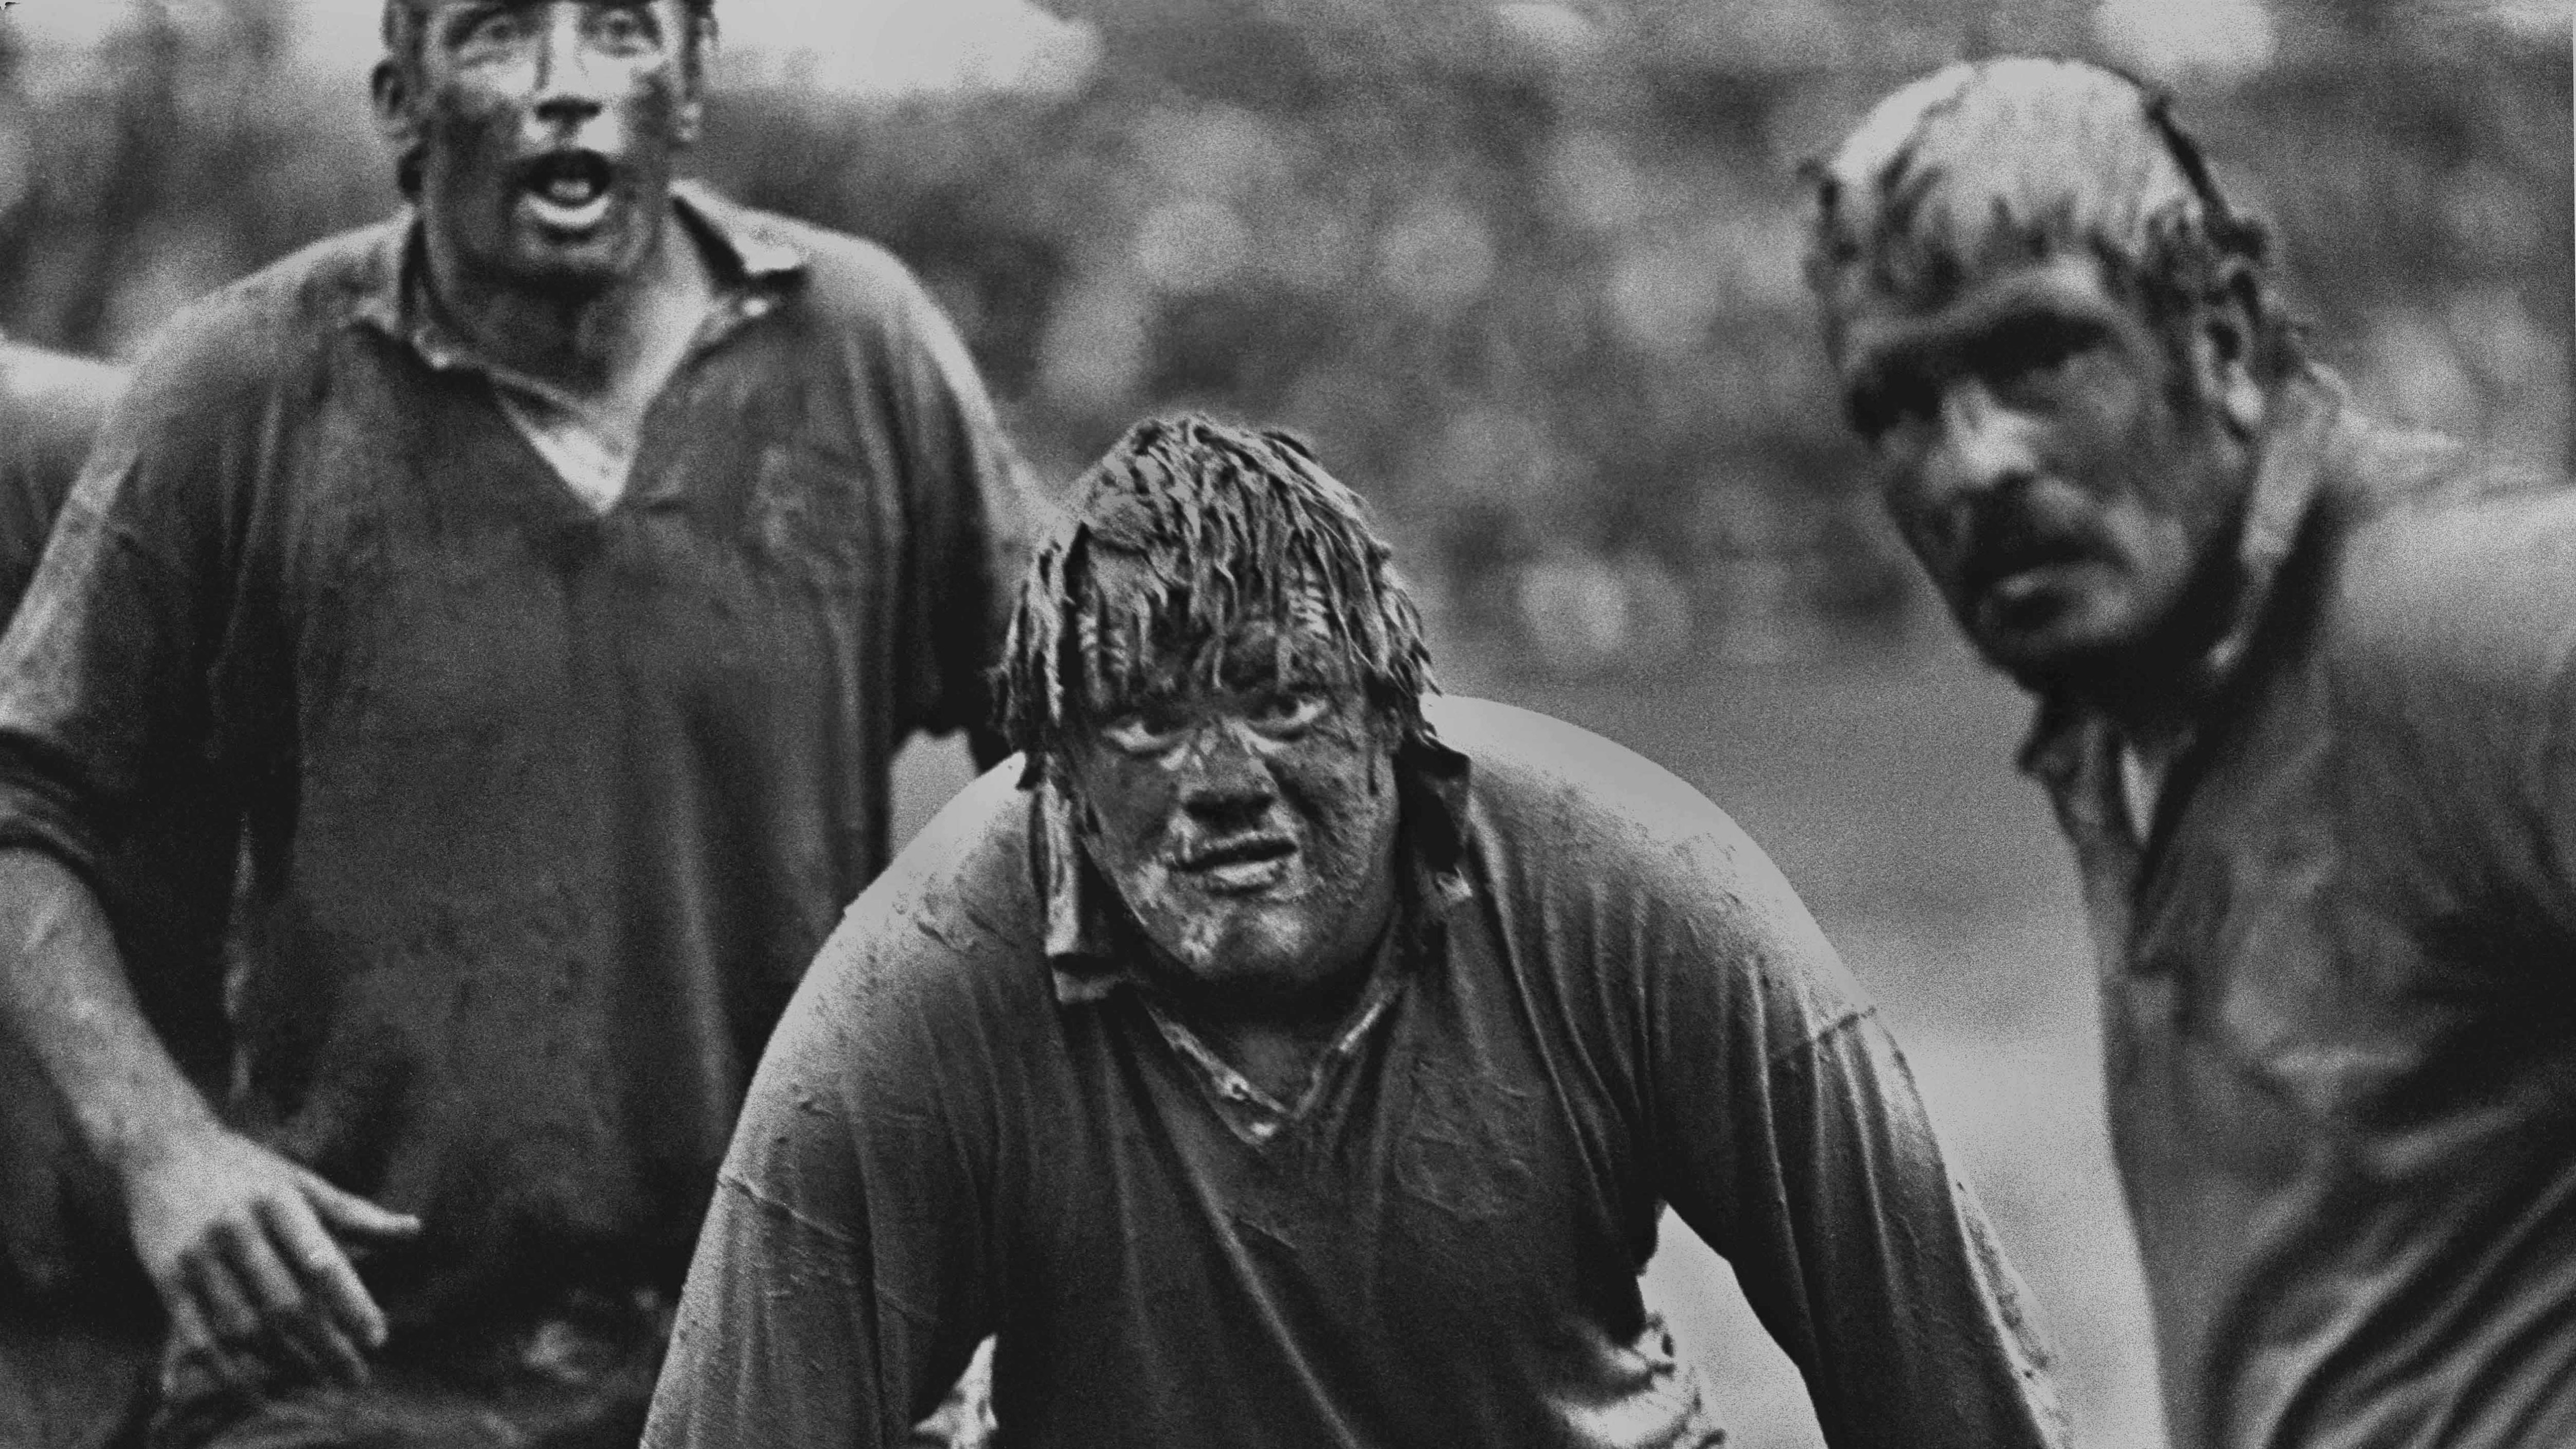 Colin Elsey special: ‘Mudman’, on tour with the Lions and boozy celebrations